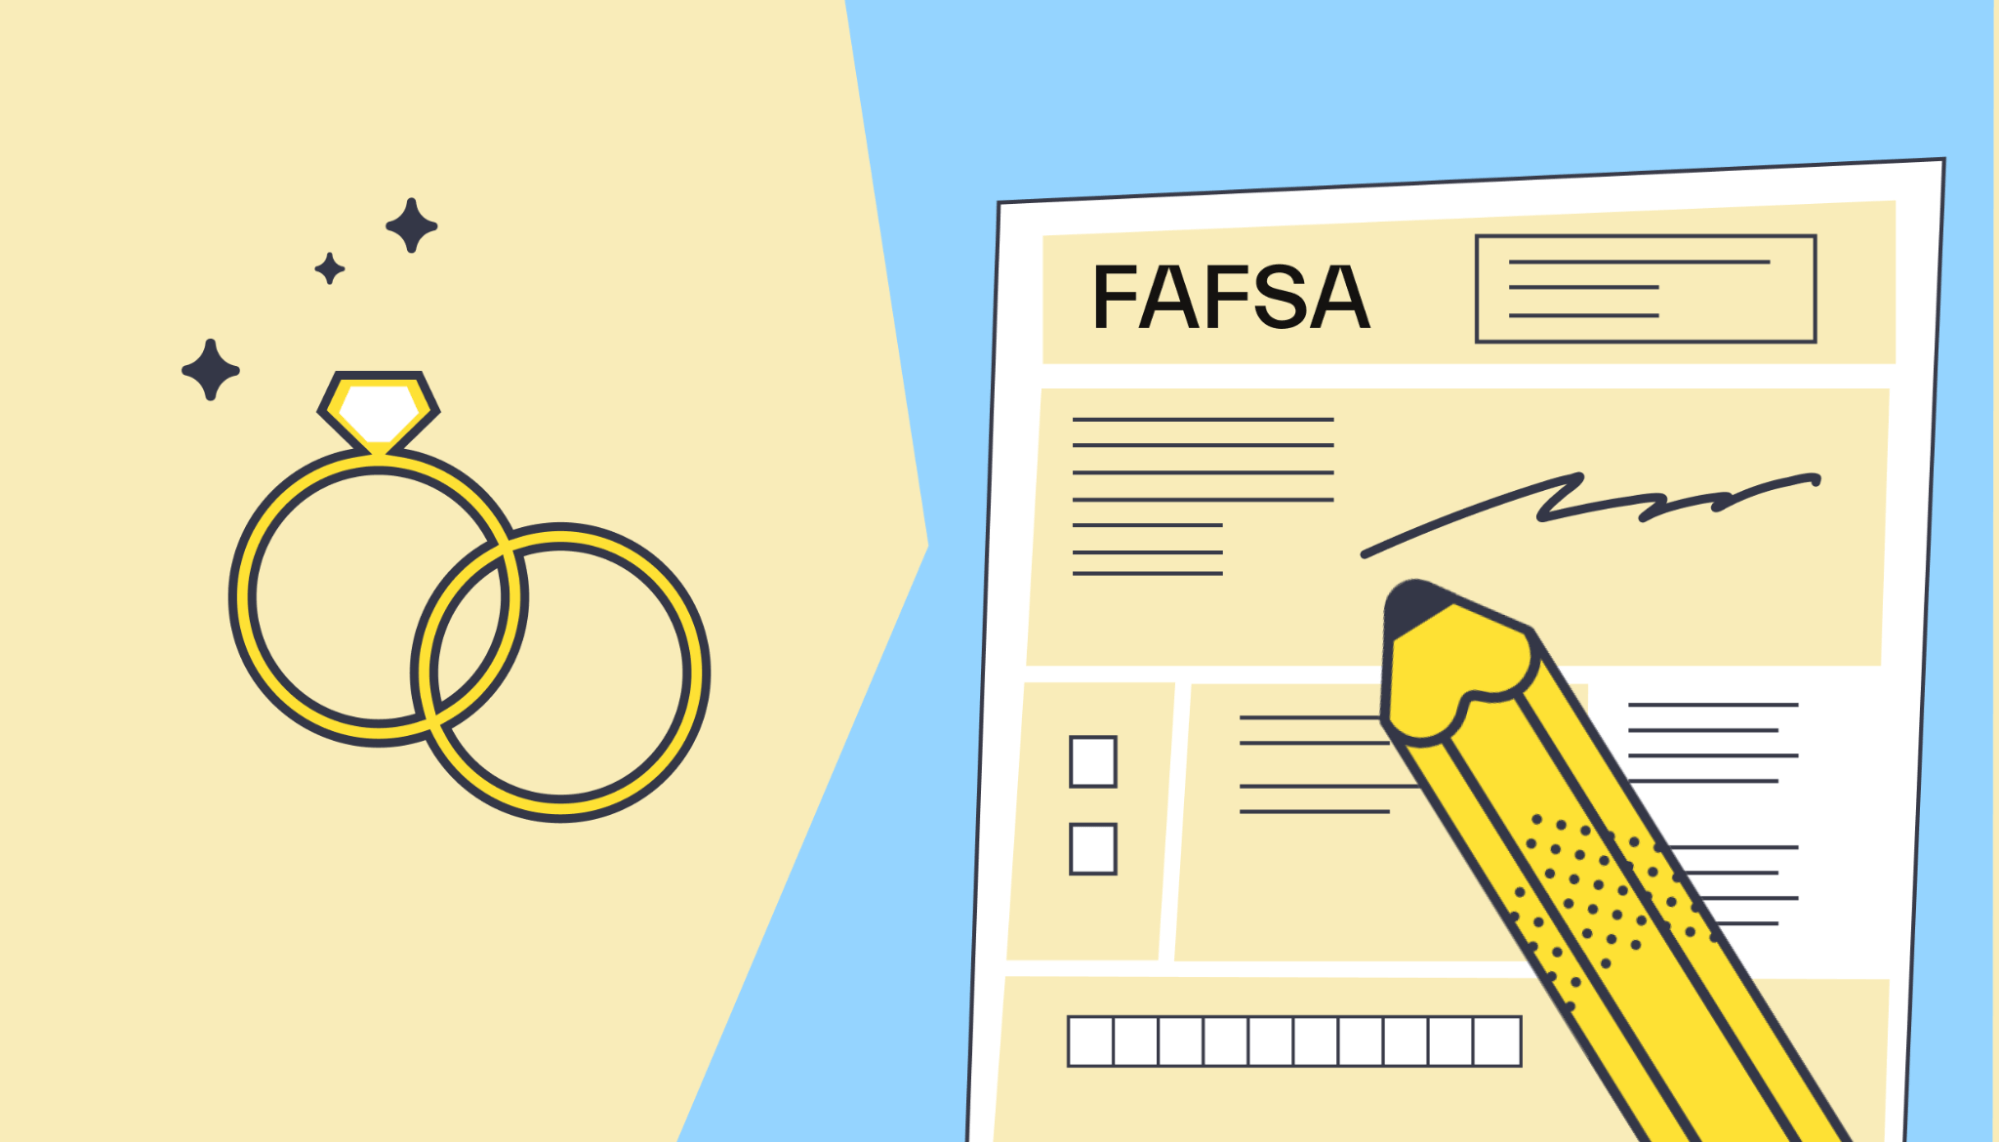 FAFSA name changes